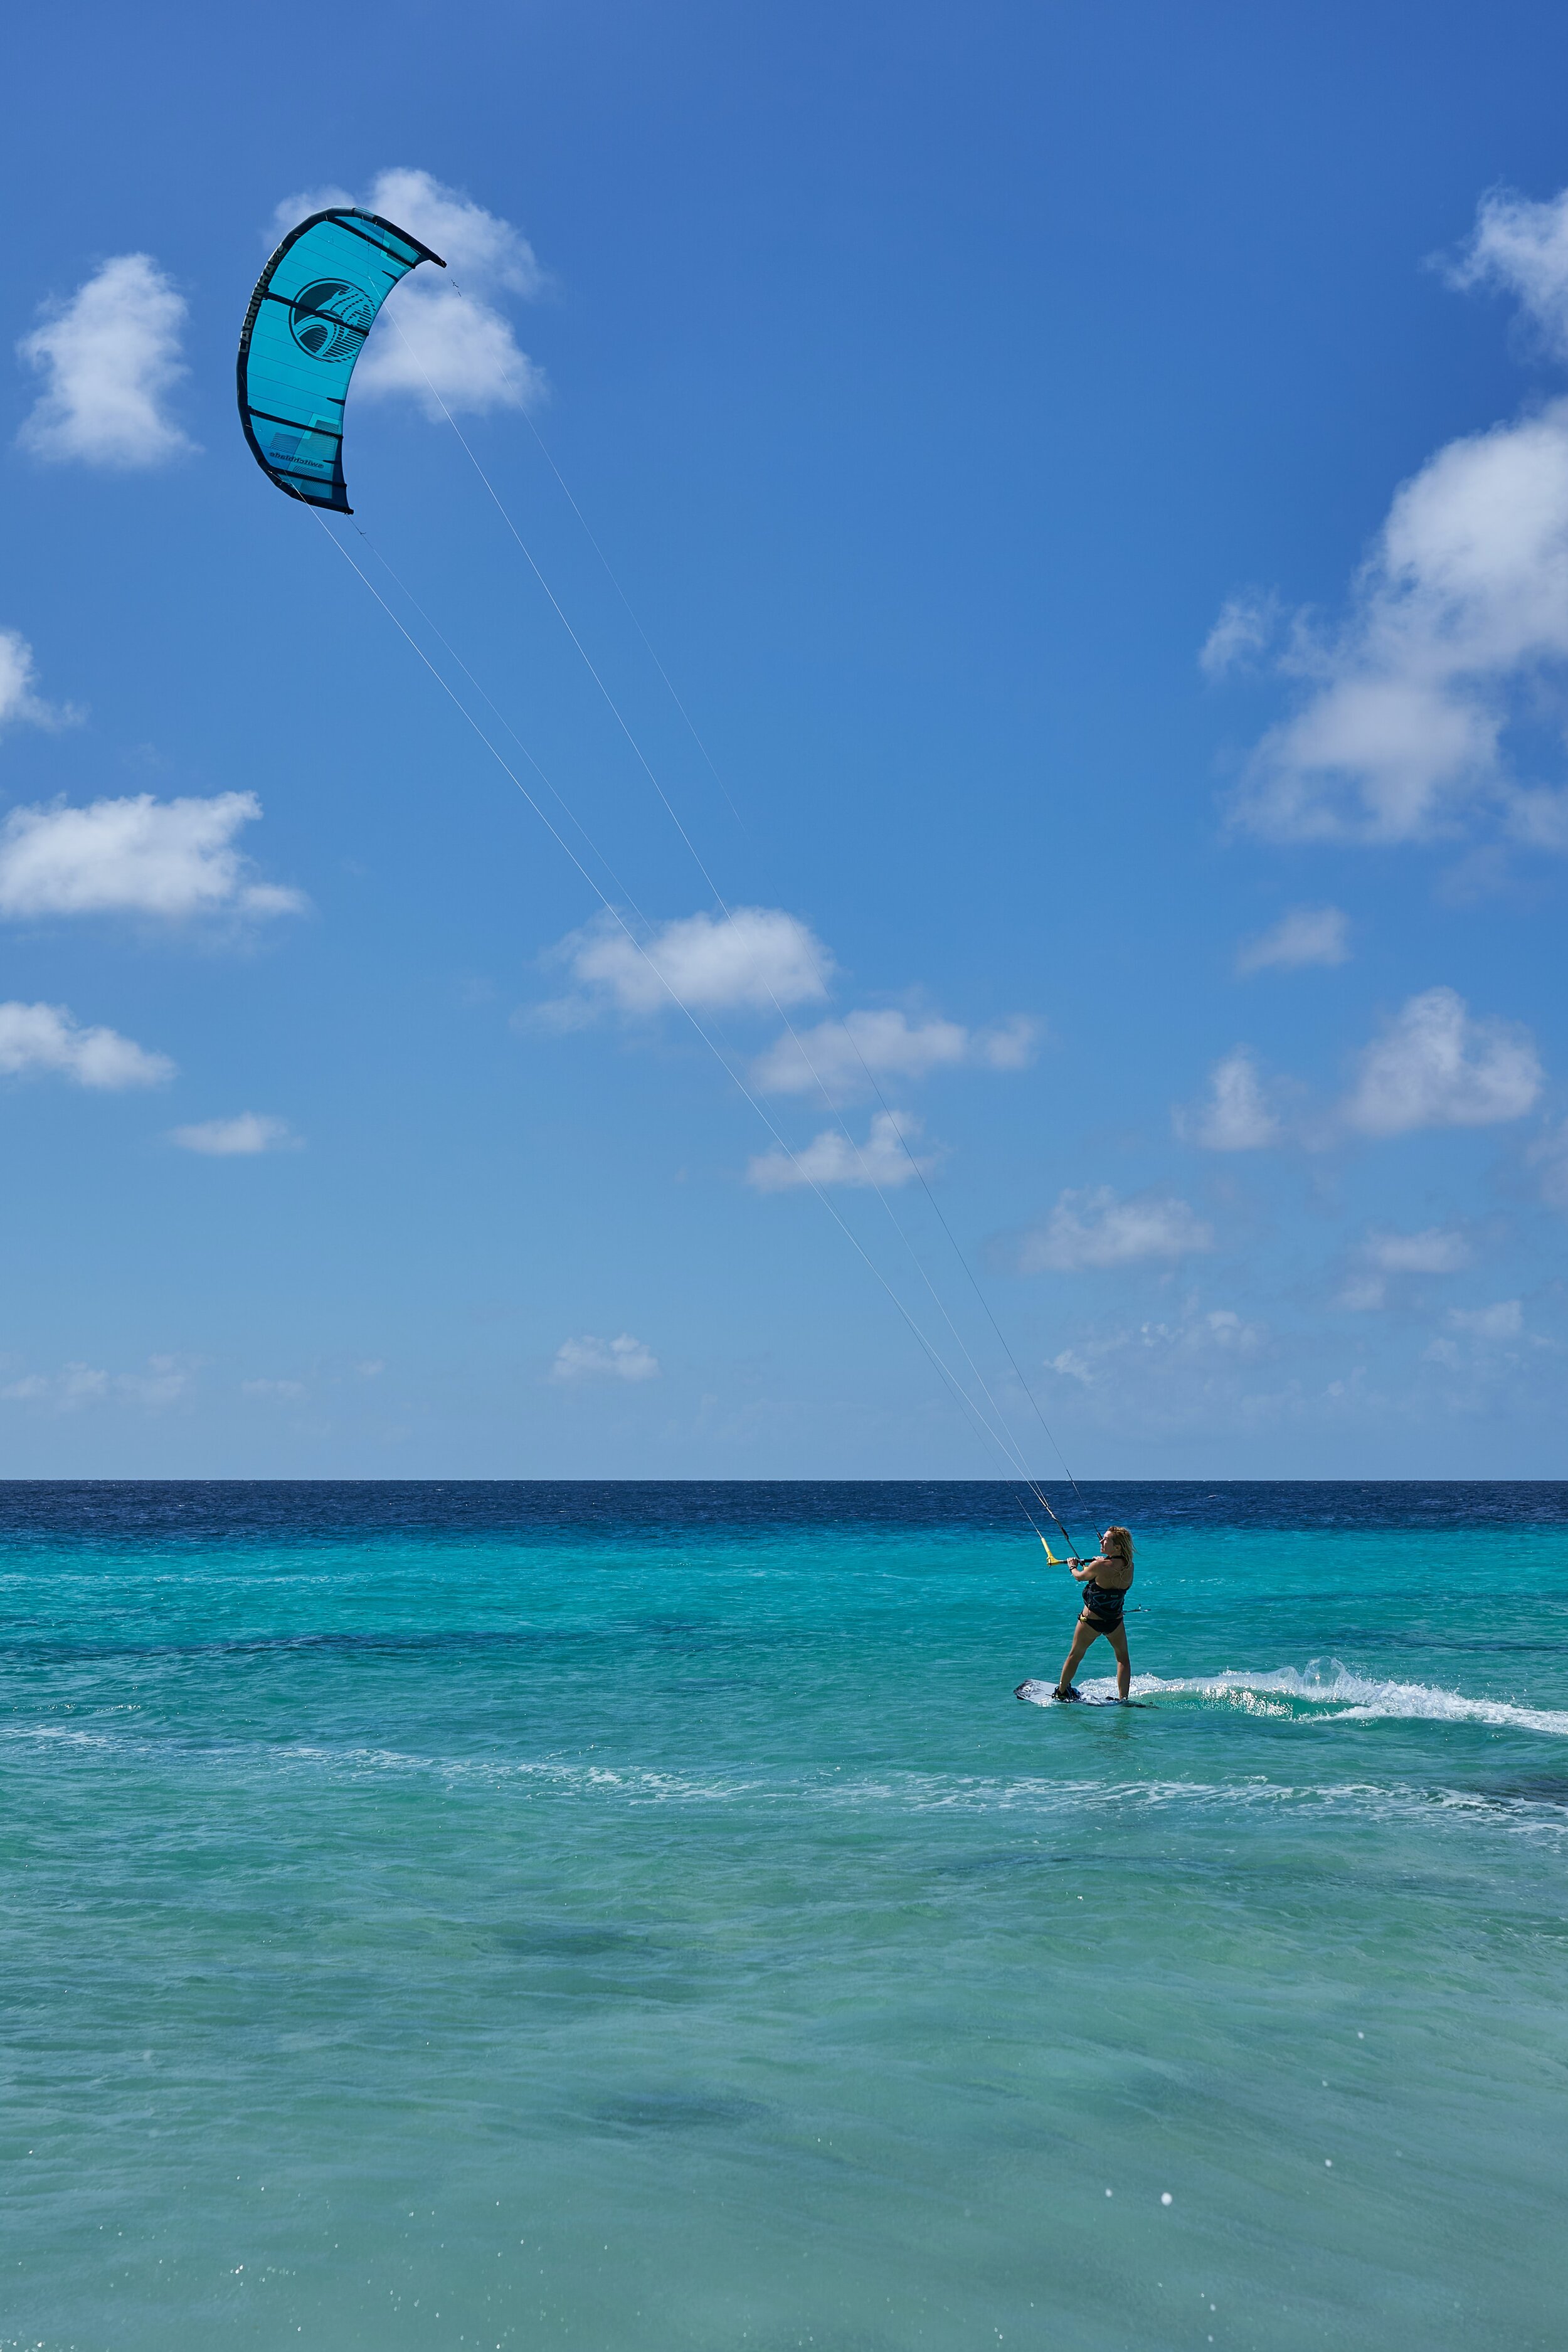 We love adventure here at 10K Dollar Day, and when near water that means water sports like kiteboarding!